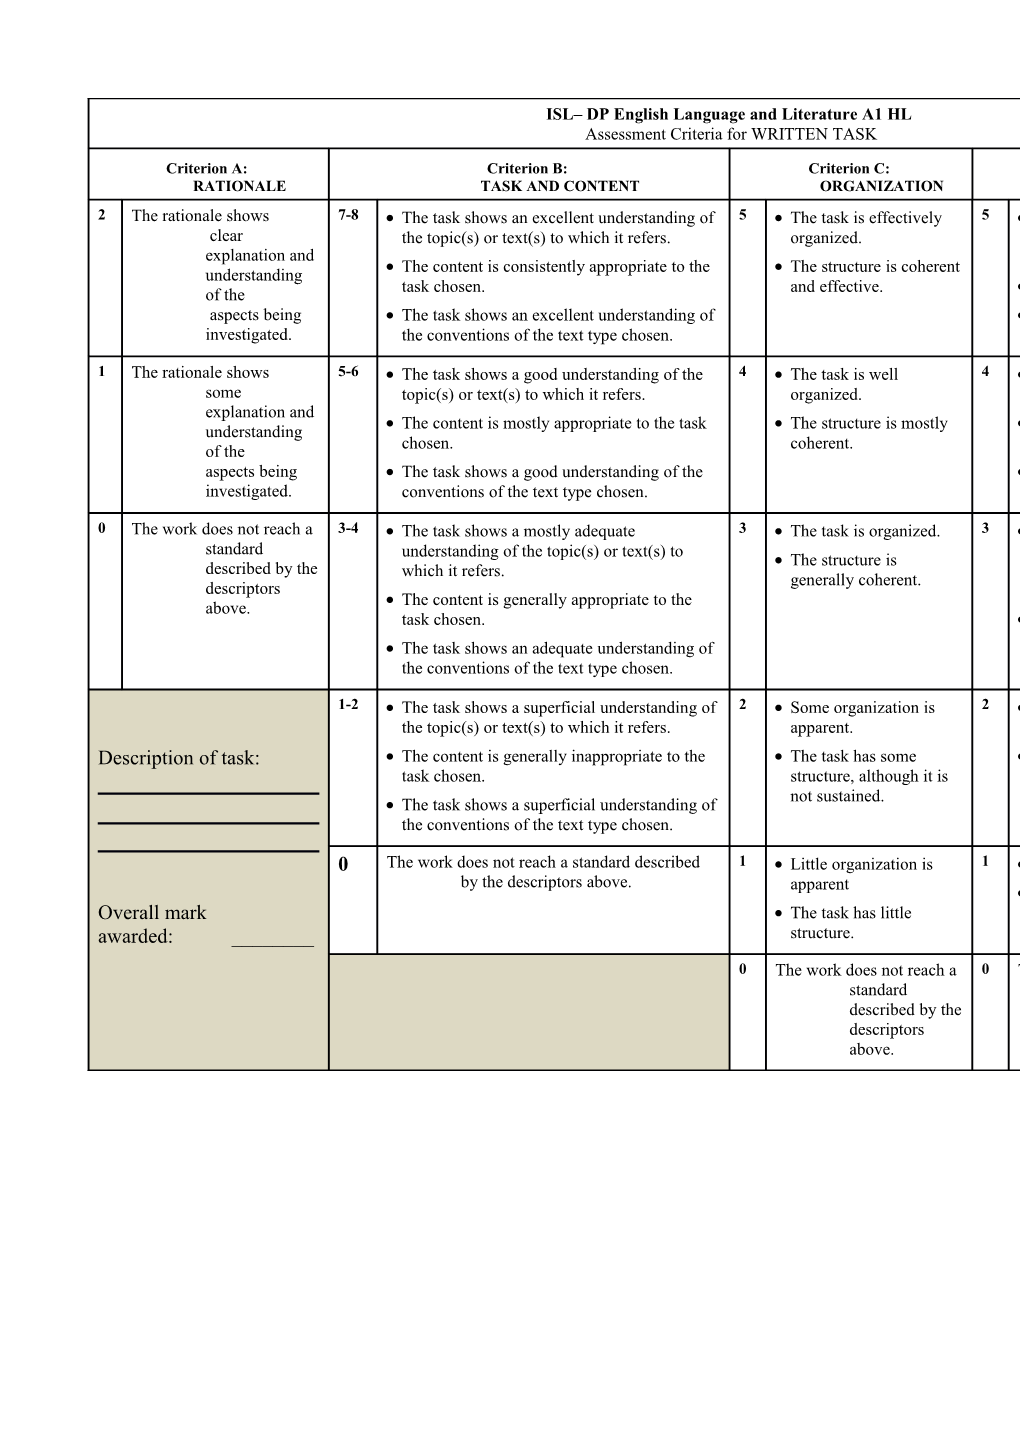 English A2 HL Assessment Criteria for Paper 1: Comparative Commentary